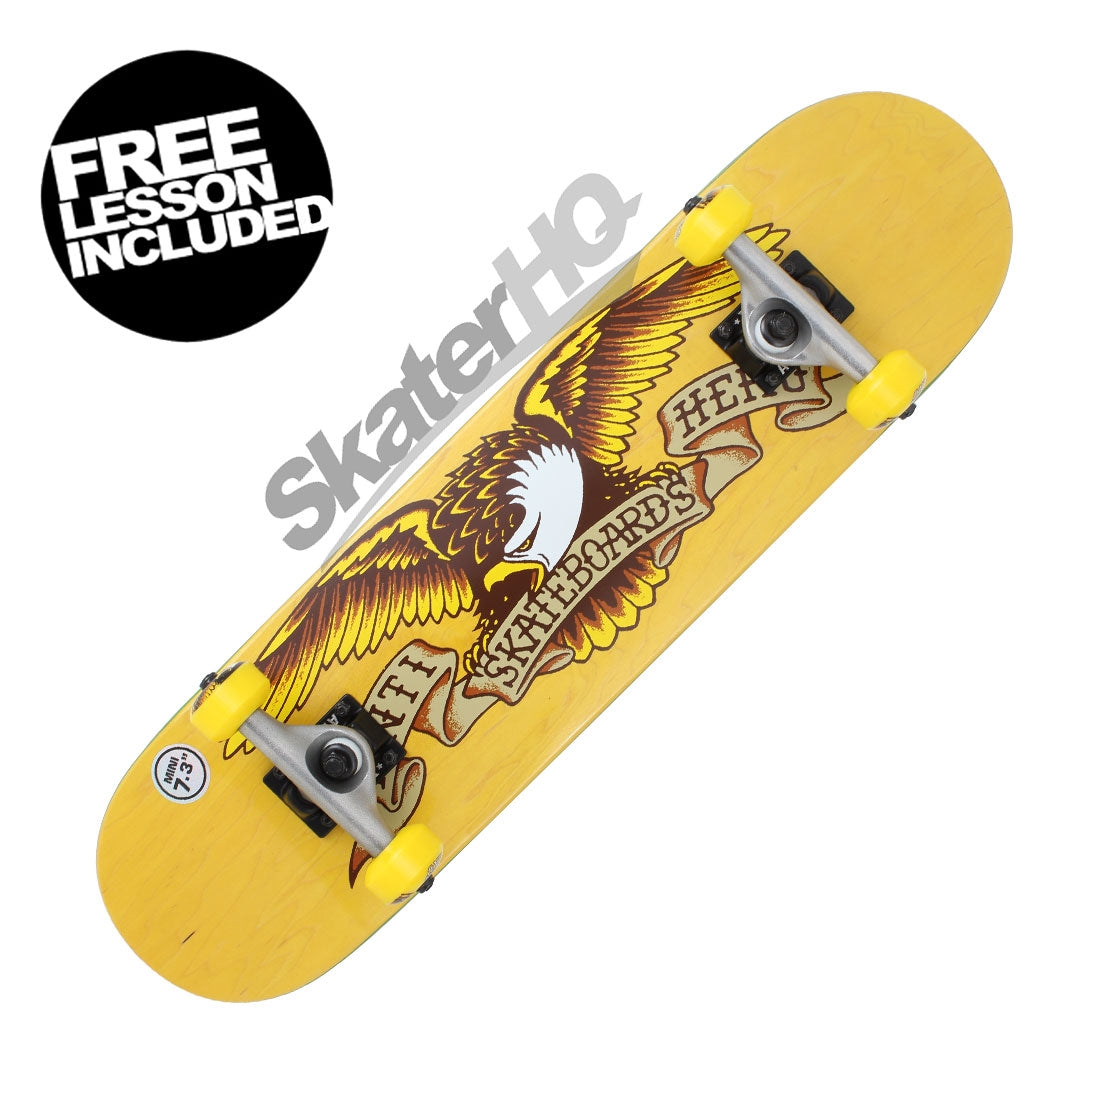 Antihero Eagle Stained 7.38 Mini Complete - Yellow Skateboard Completes Modern Street